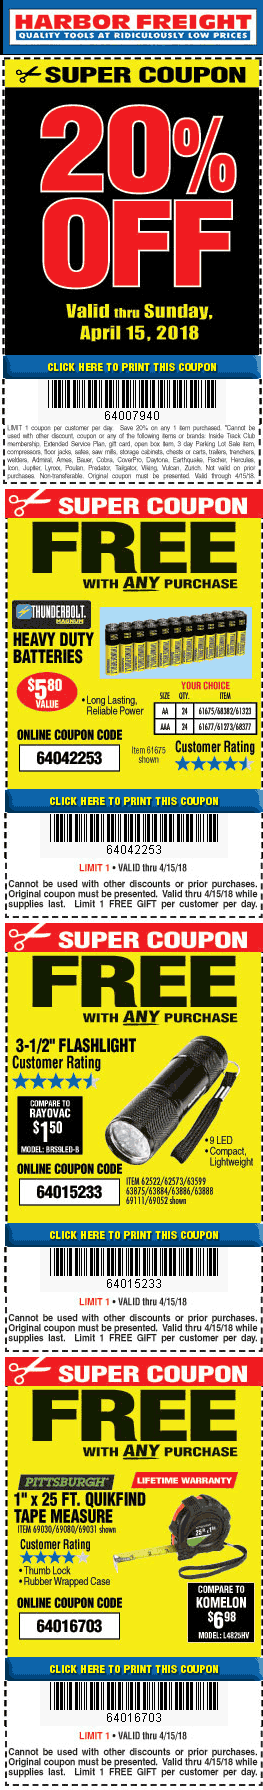 Harbor Freight Coupon April 2024 20% off a single item at Harbor Freight Tools